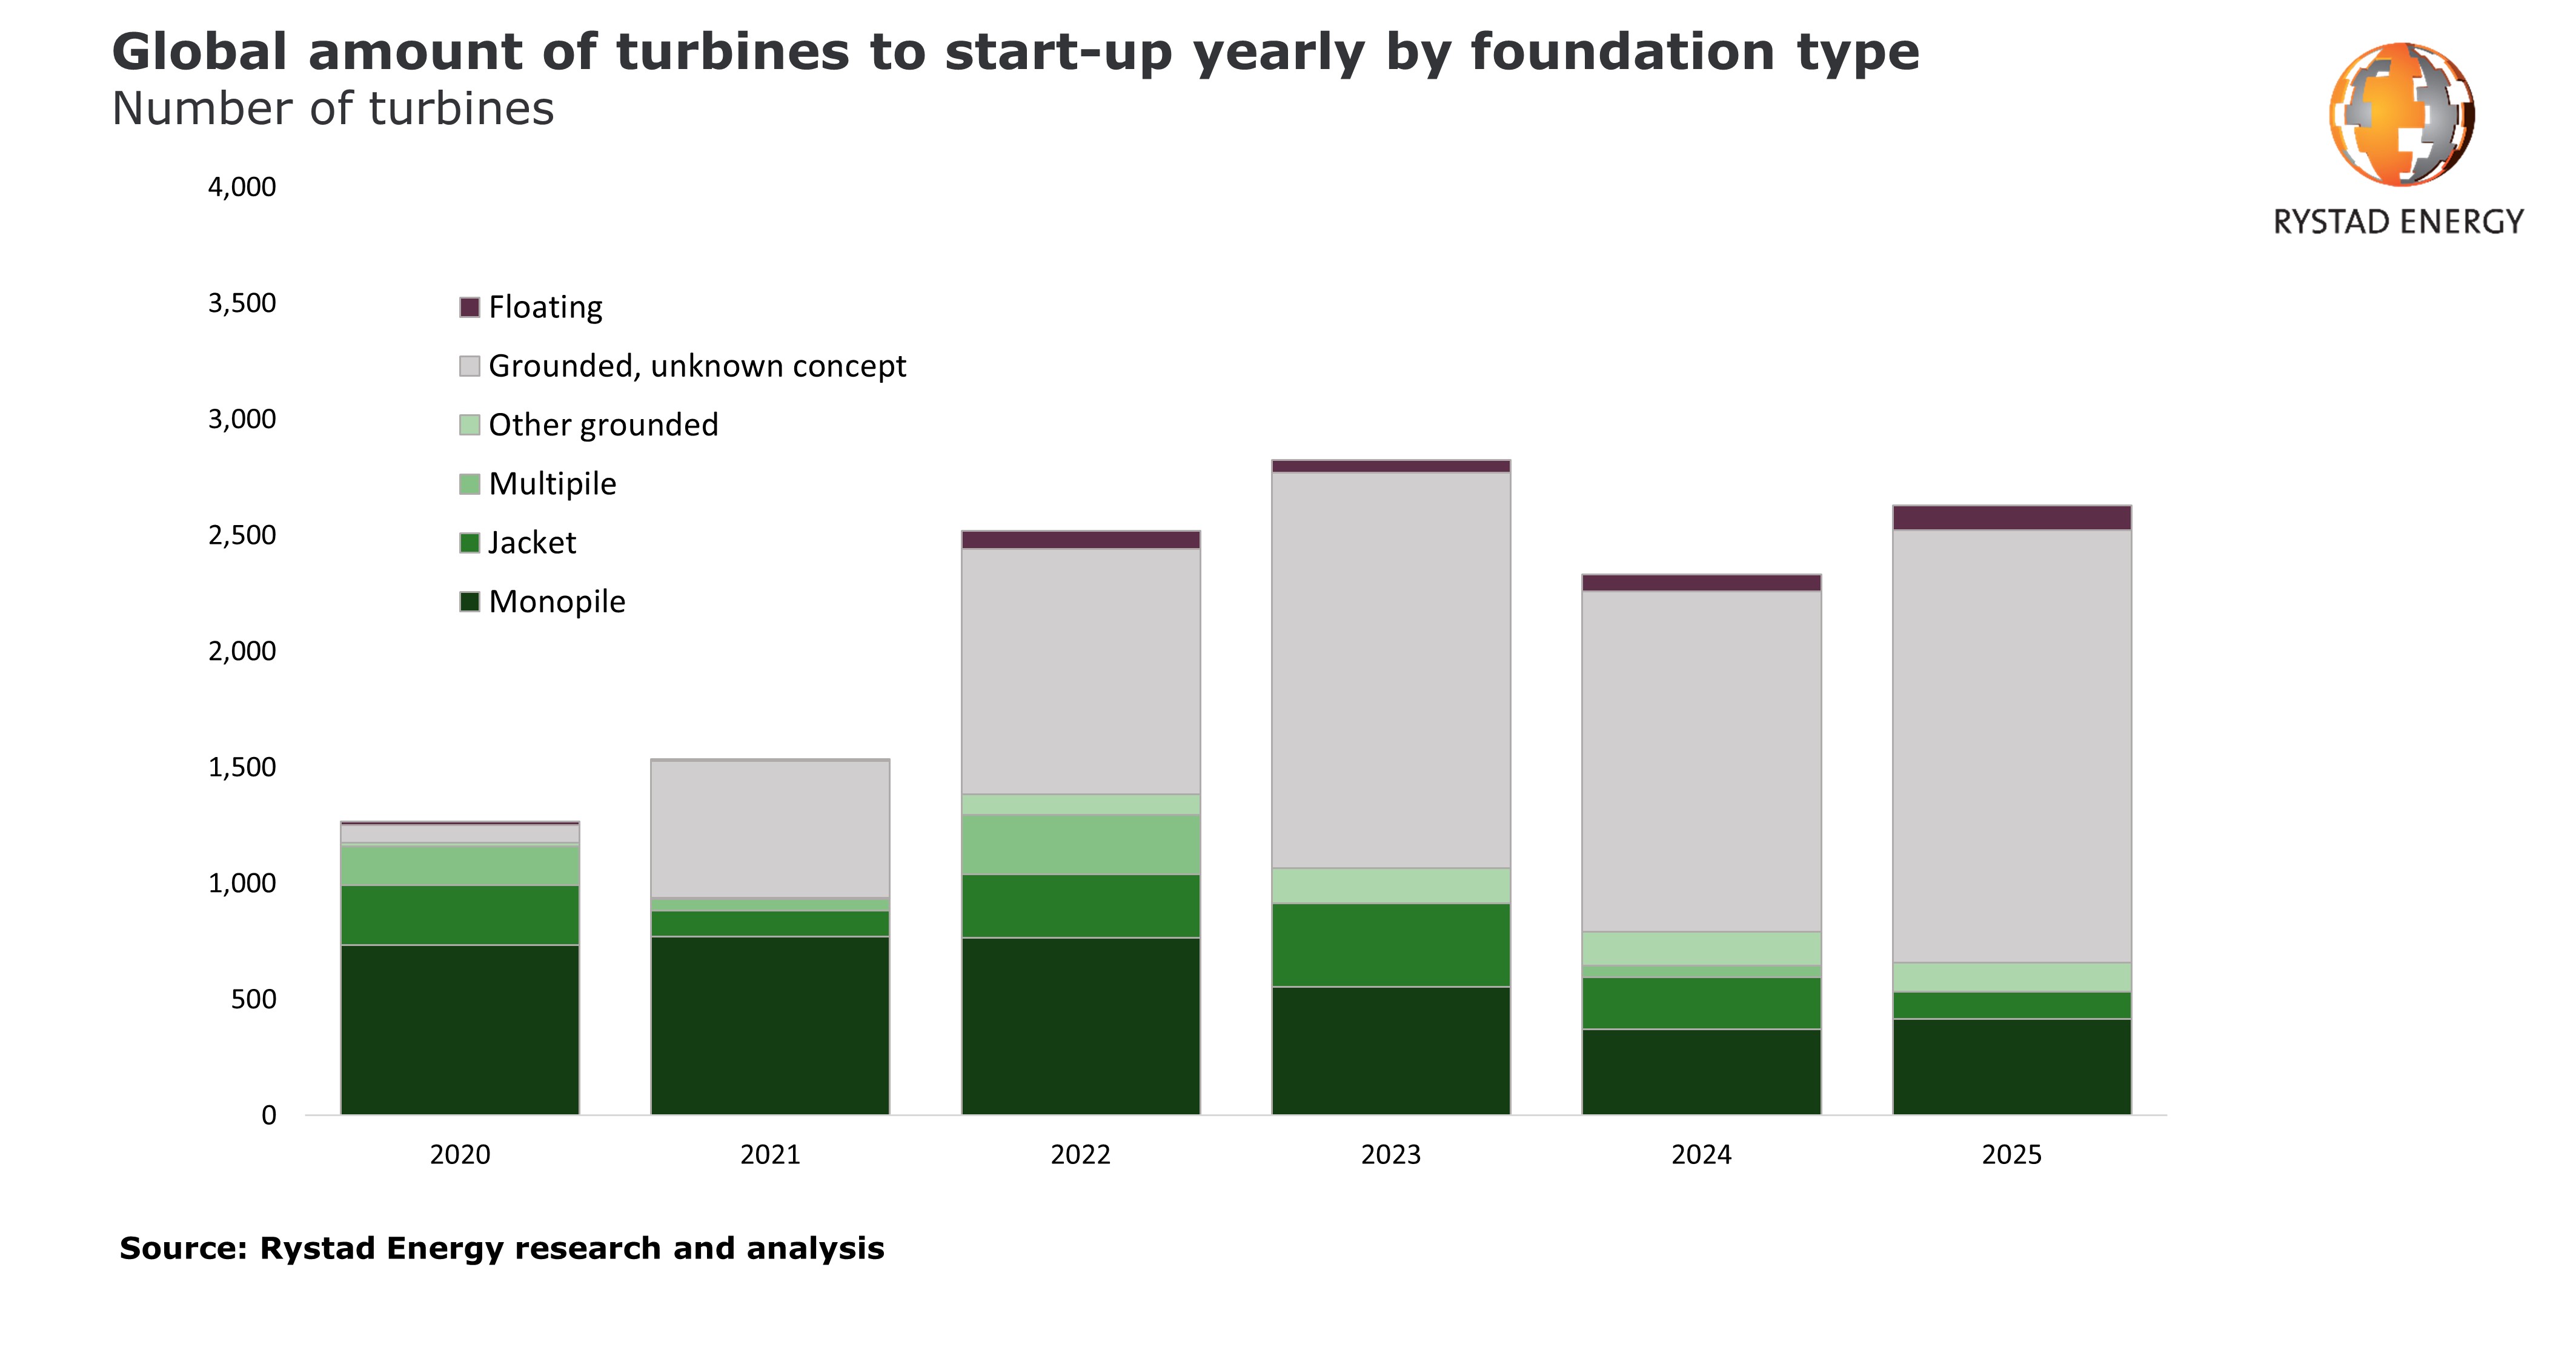 Bar chart showing global amount of turbines to start-up yearly by foundation type in number of turbines